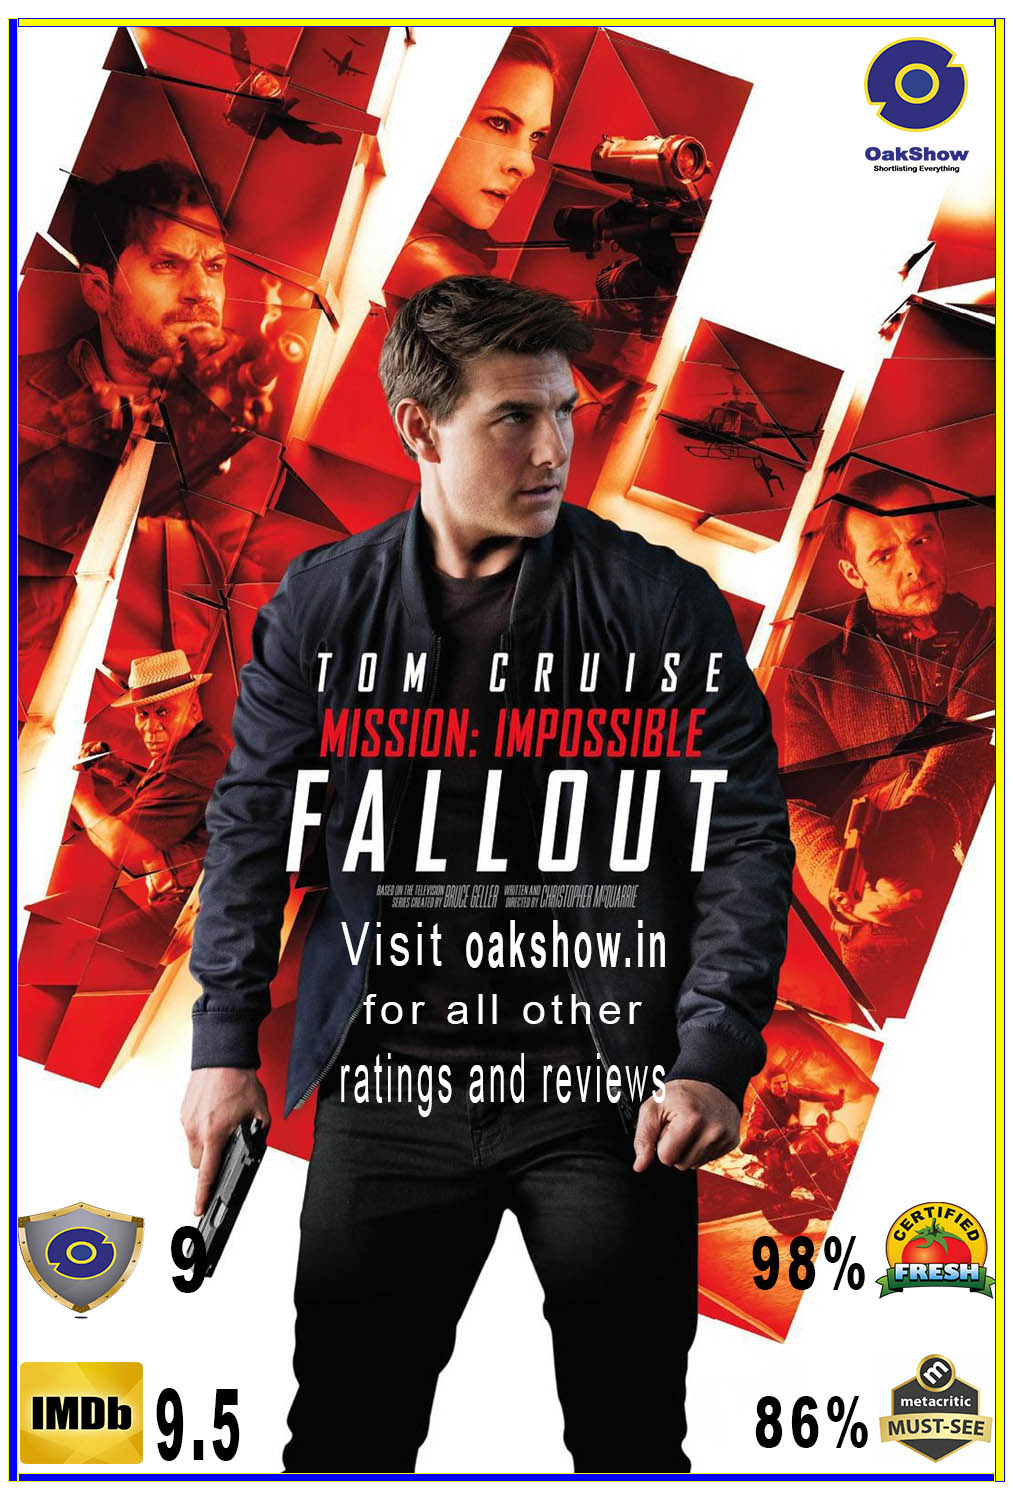 War and Mission: Impossible Fallout